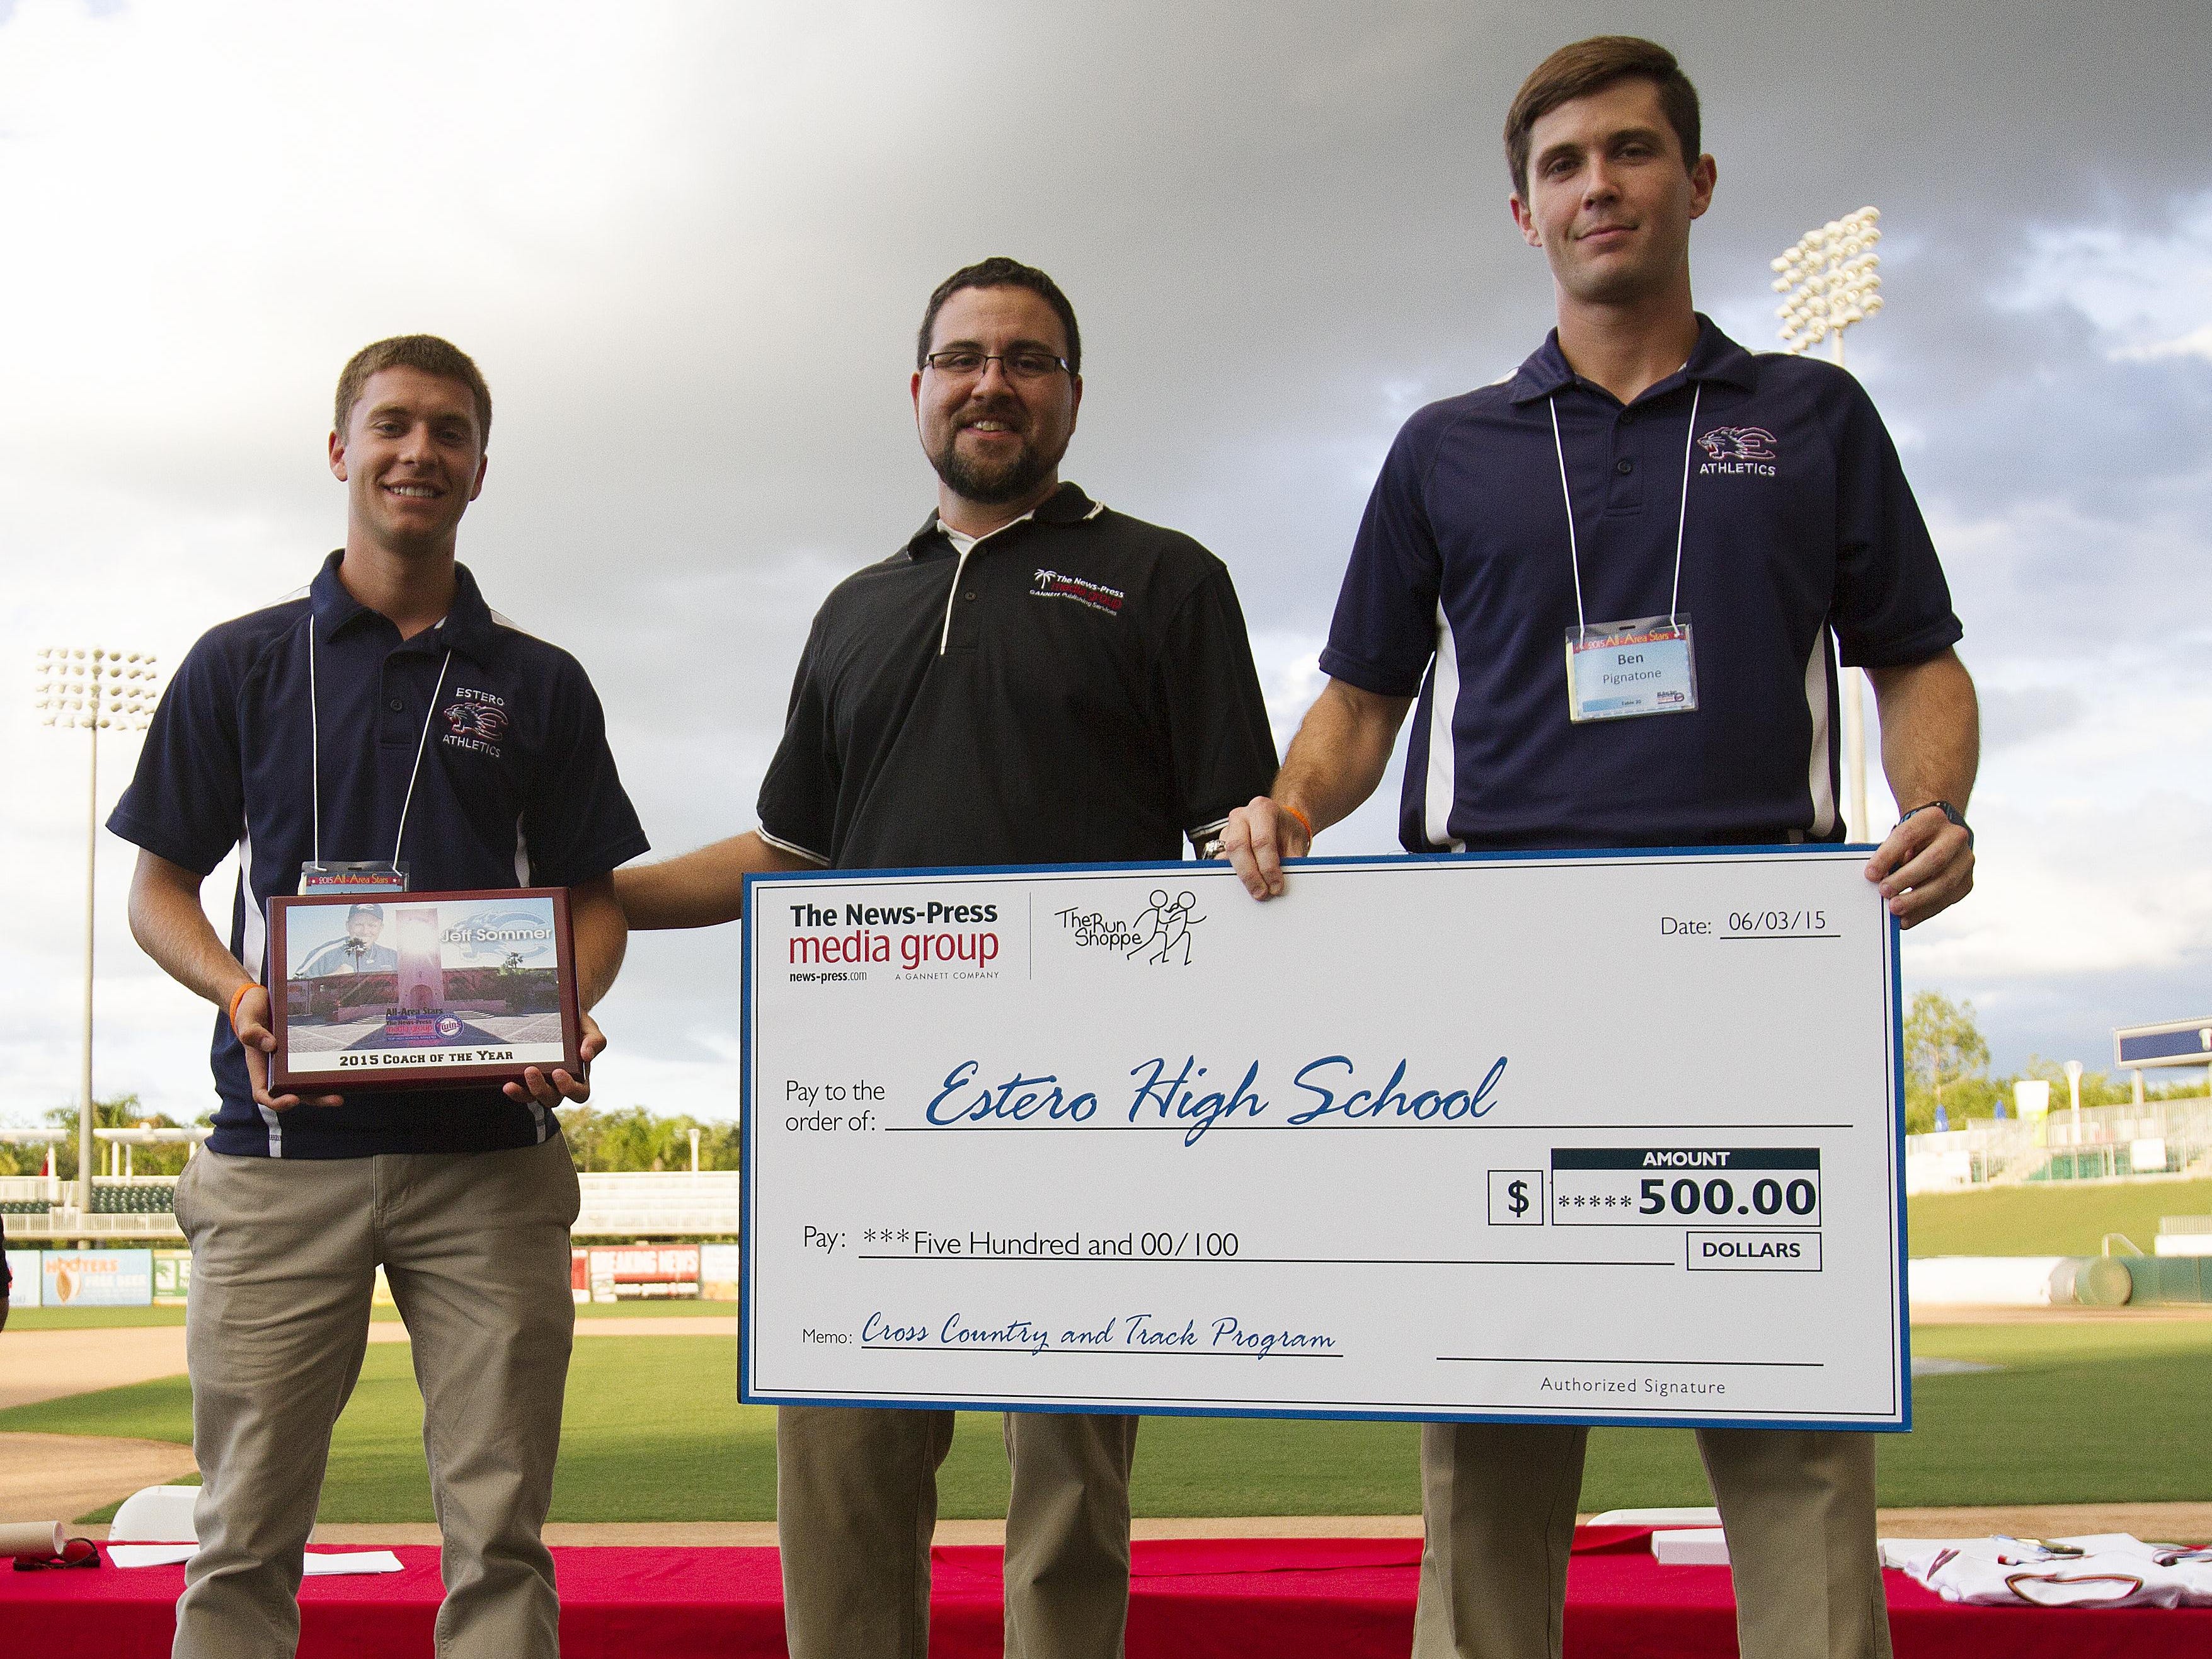 Adam Sommer, left, the son of the late Jeff Sommer and Ben Pingatone, right, the assistant track and field coach at Estero High School accept a five hundred dollar check from the News-Press Media Group in honor of the Coach Sommer. Handing out the donation is News-Press content coach, Ed Reed.